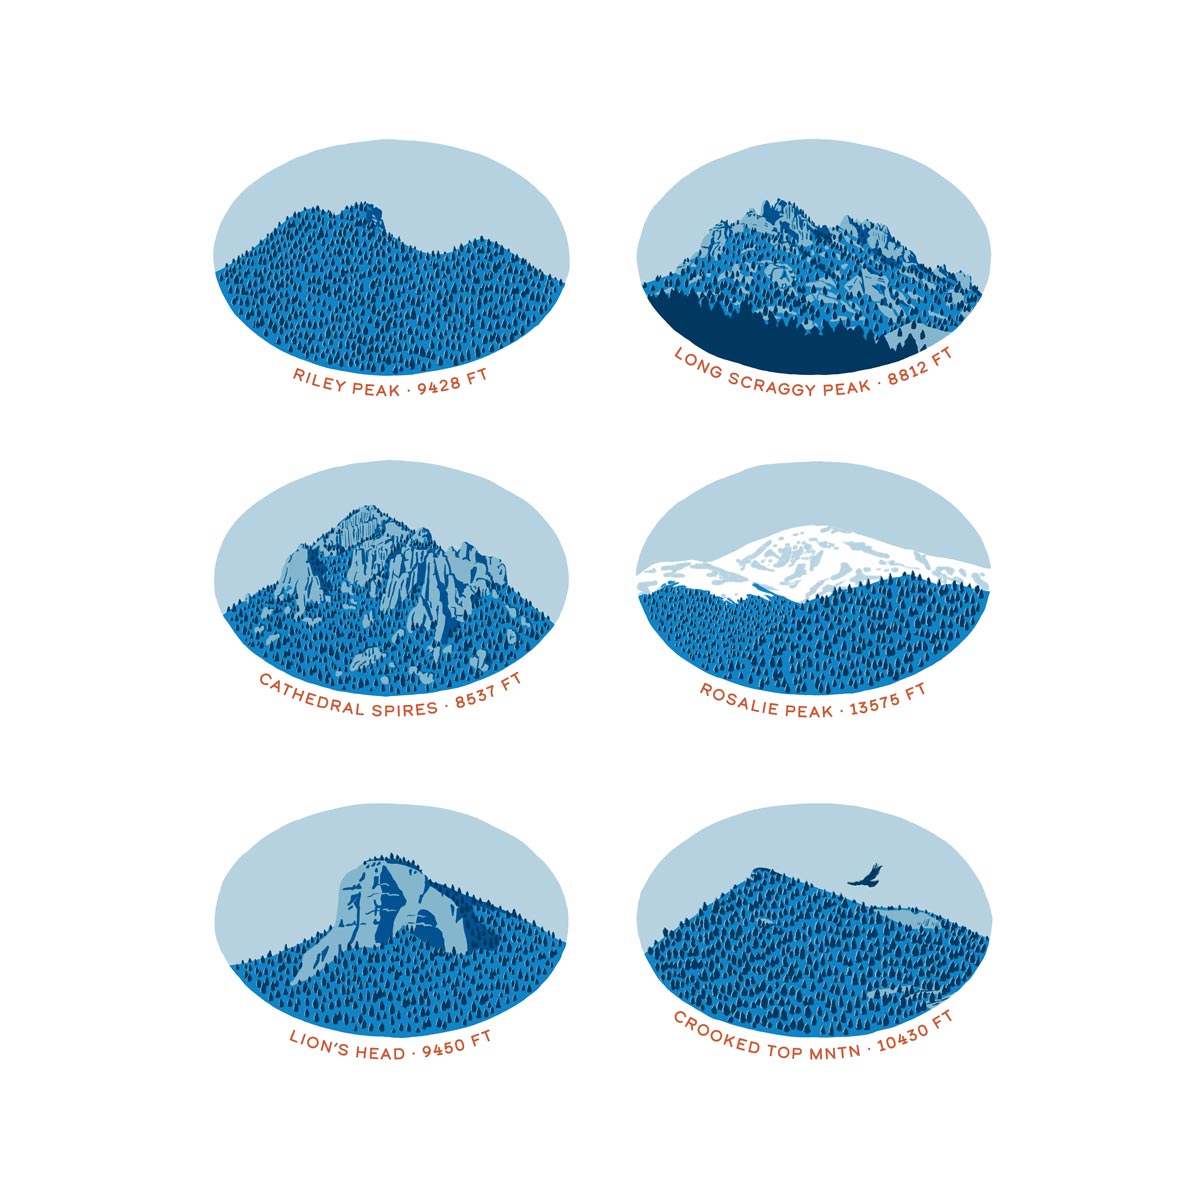 An art print with six mountain illustrations drawn in blue with elevations written underneath